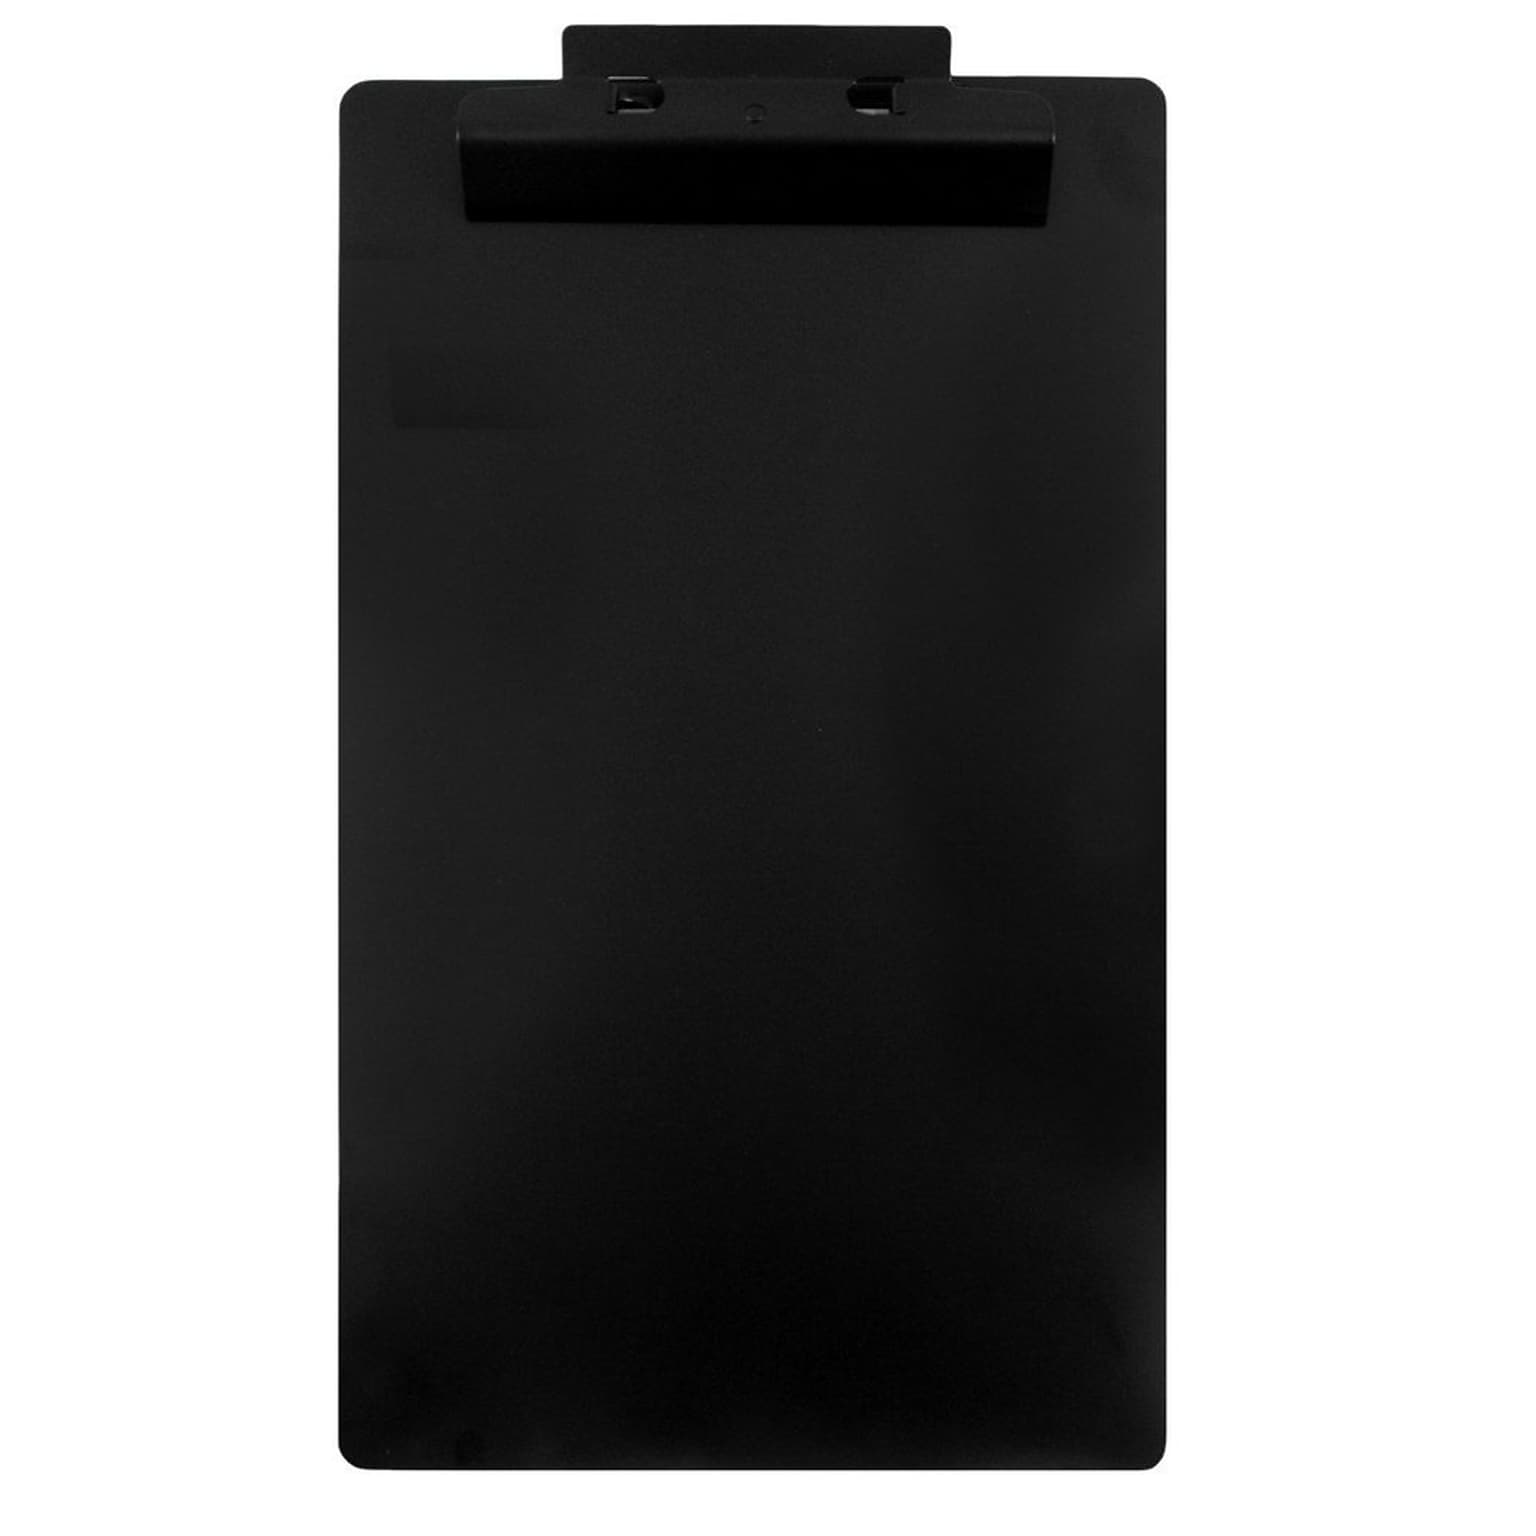 JAM Paper® Aluminum Premium Clipboard with Hinge, Legal Size, 9 x 15 1/2, Black Clip Board, Sold Individually (340933569)